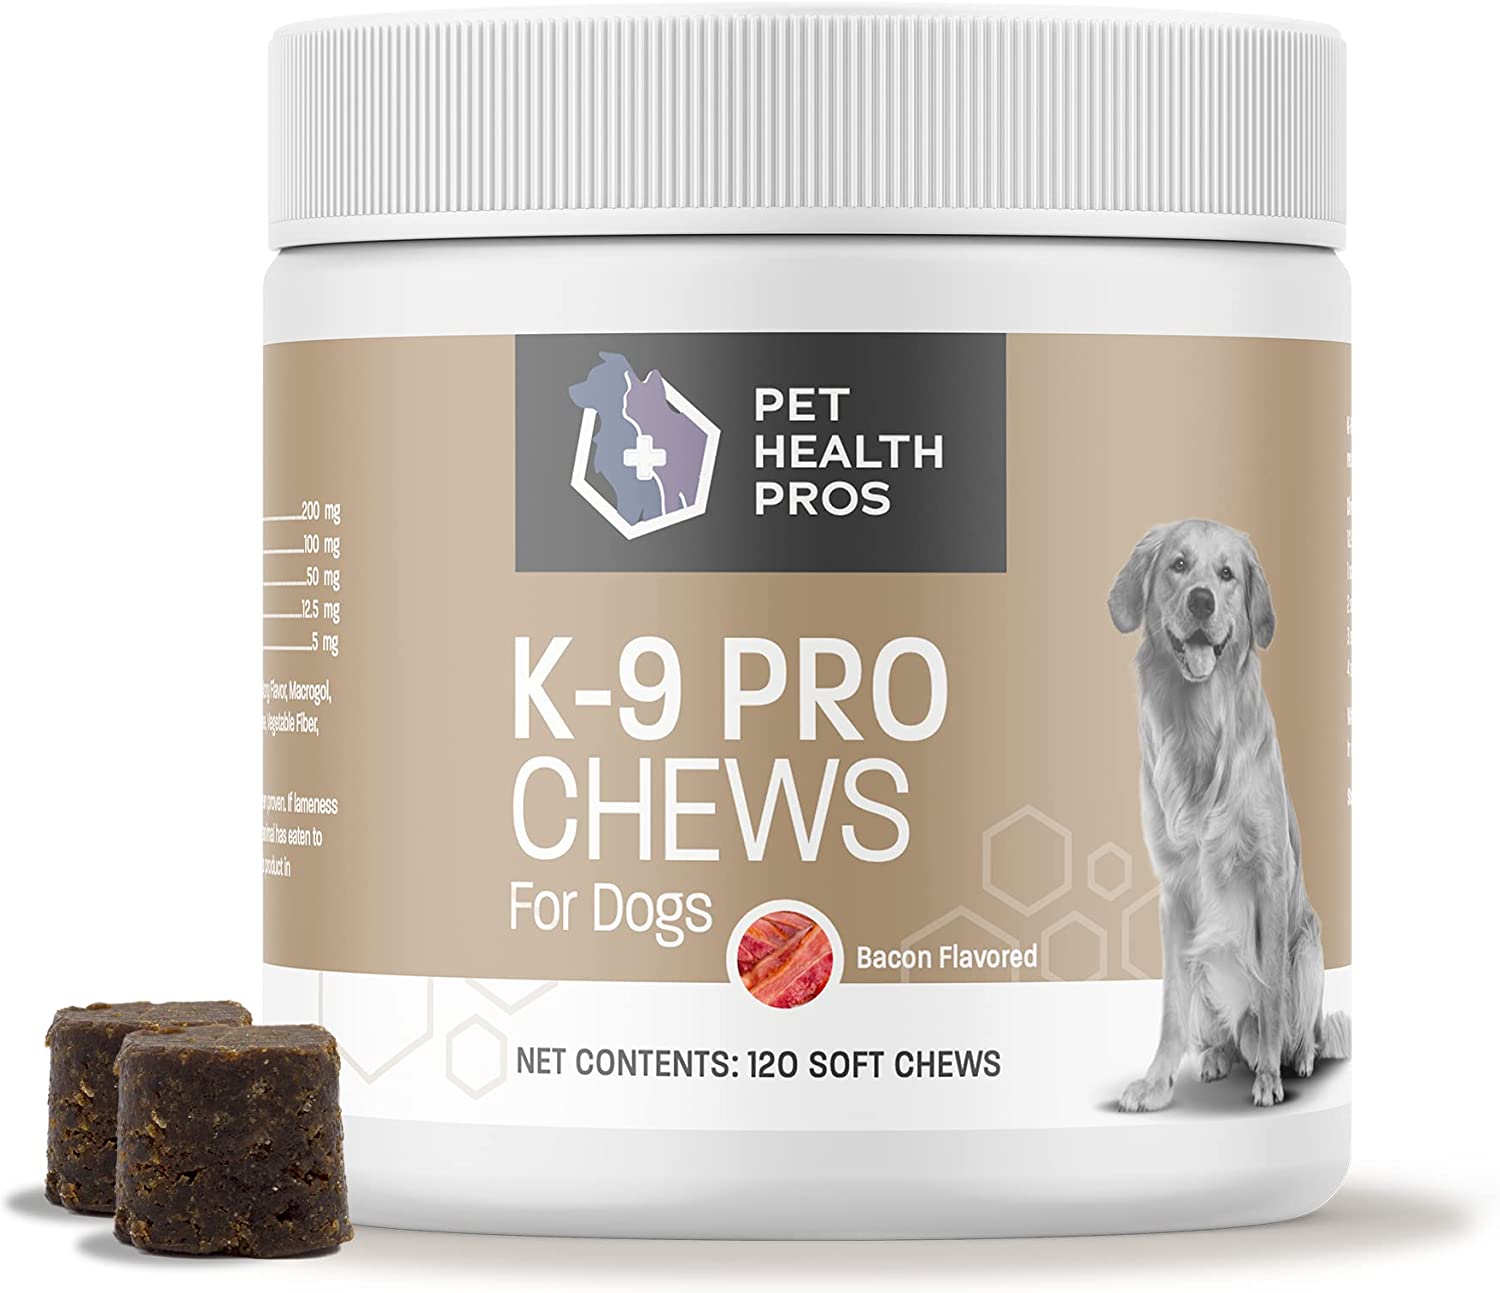 K-9 Pro Dog Joint Supplement for Dogs - Bacon Flavored